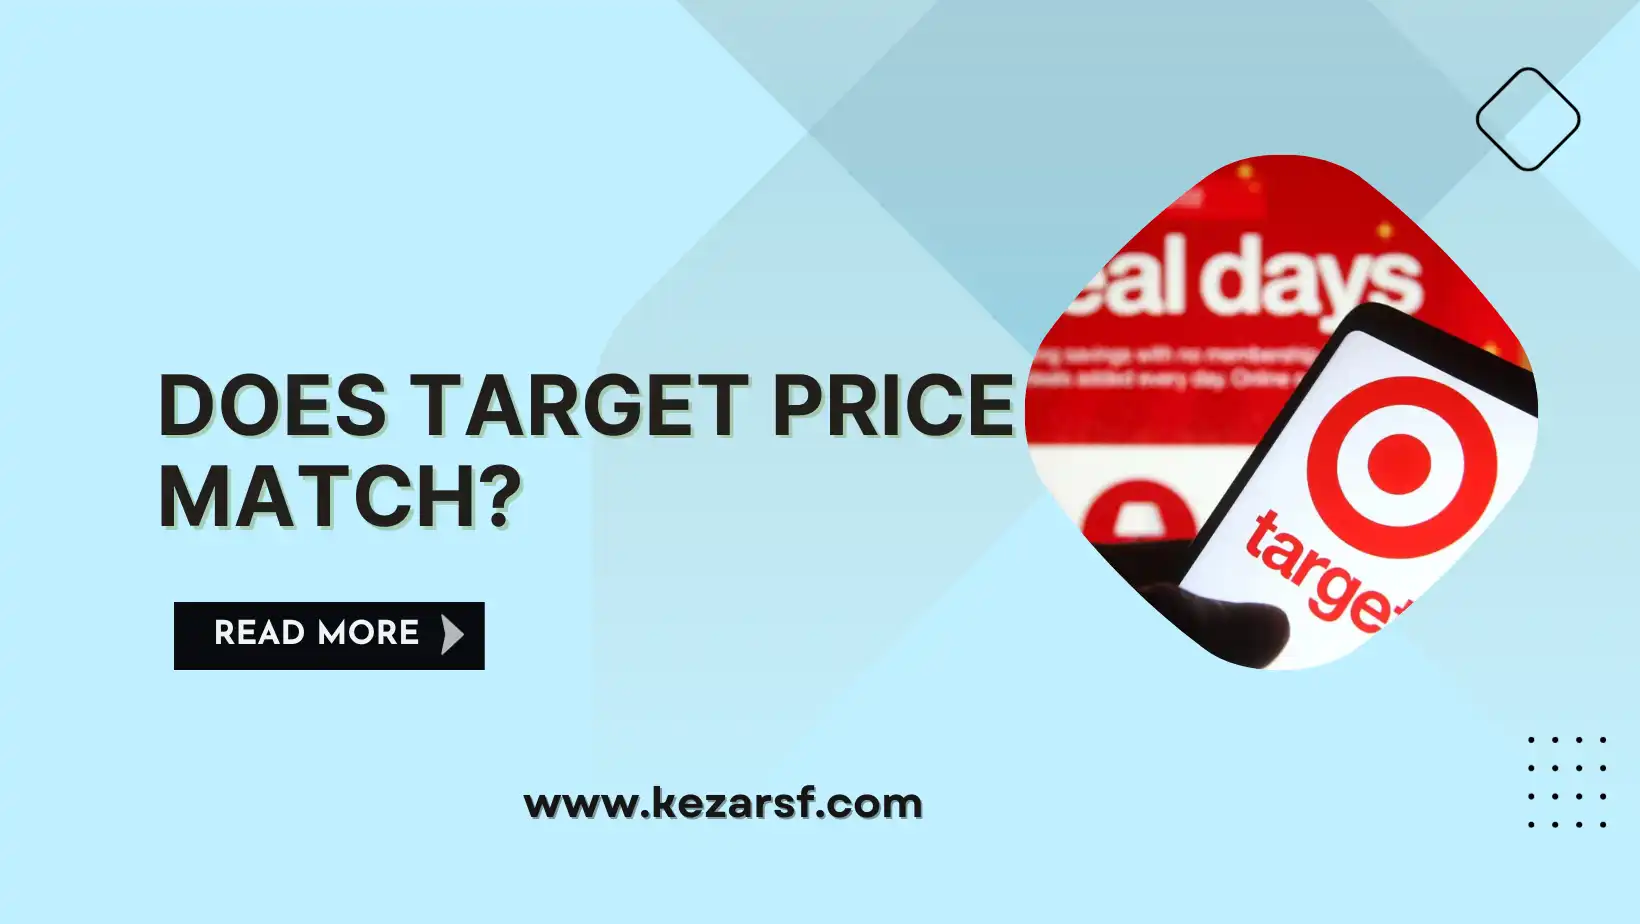 Does Target Price Match?